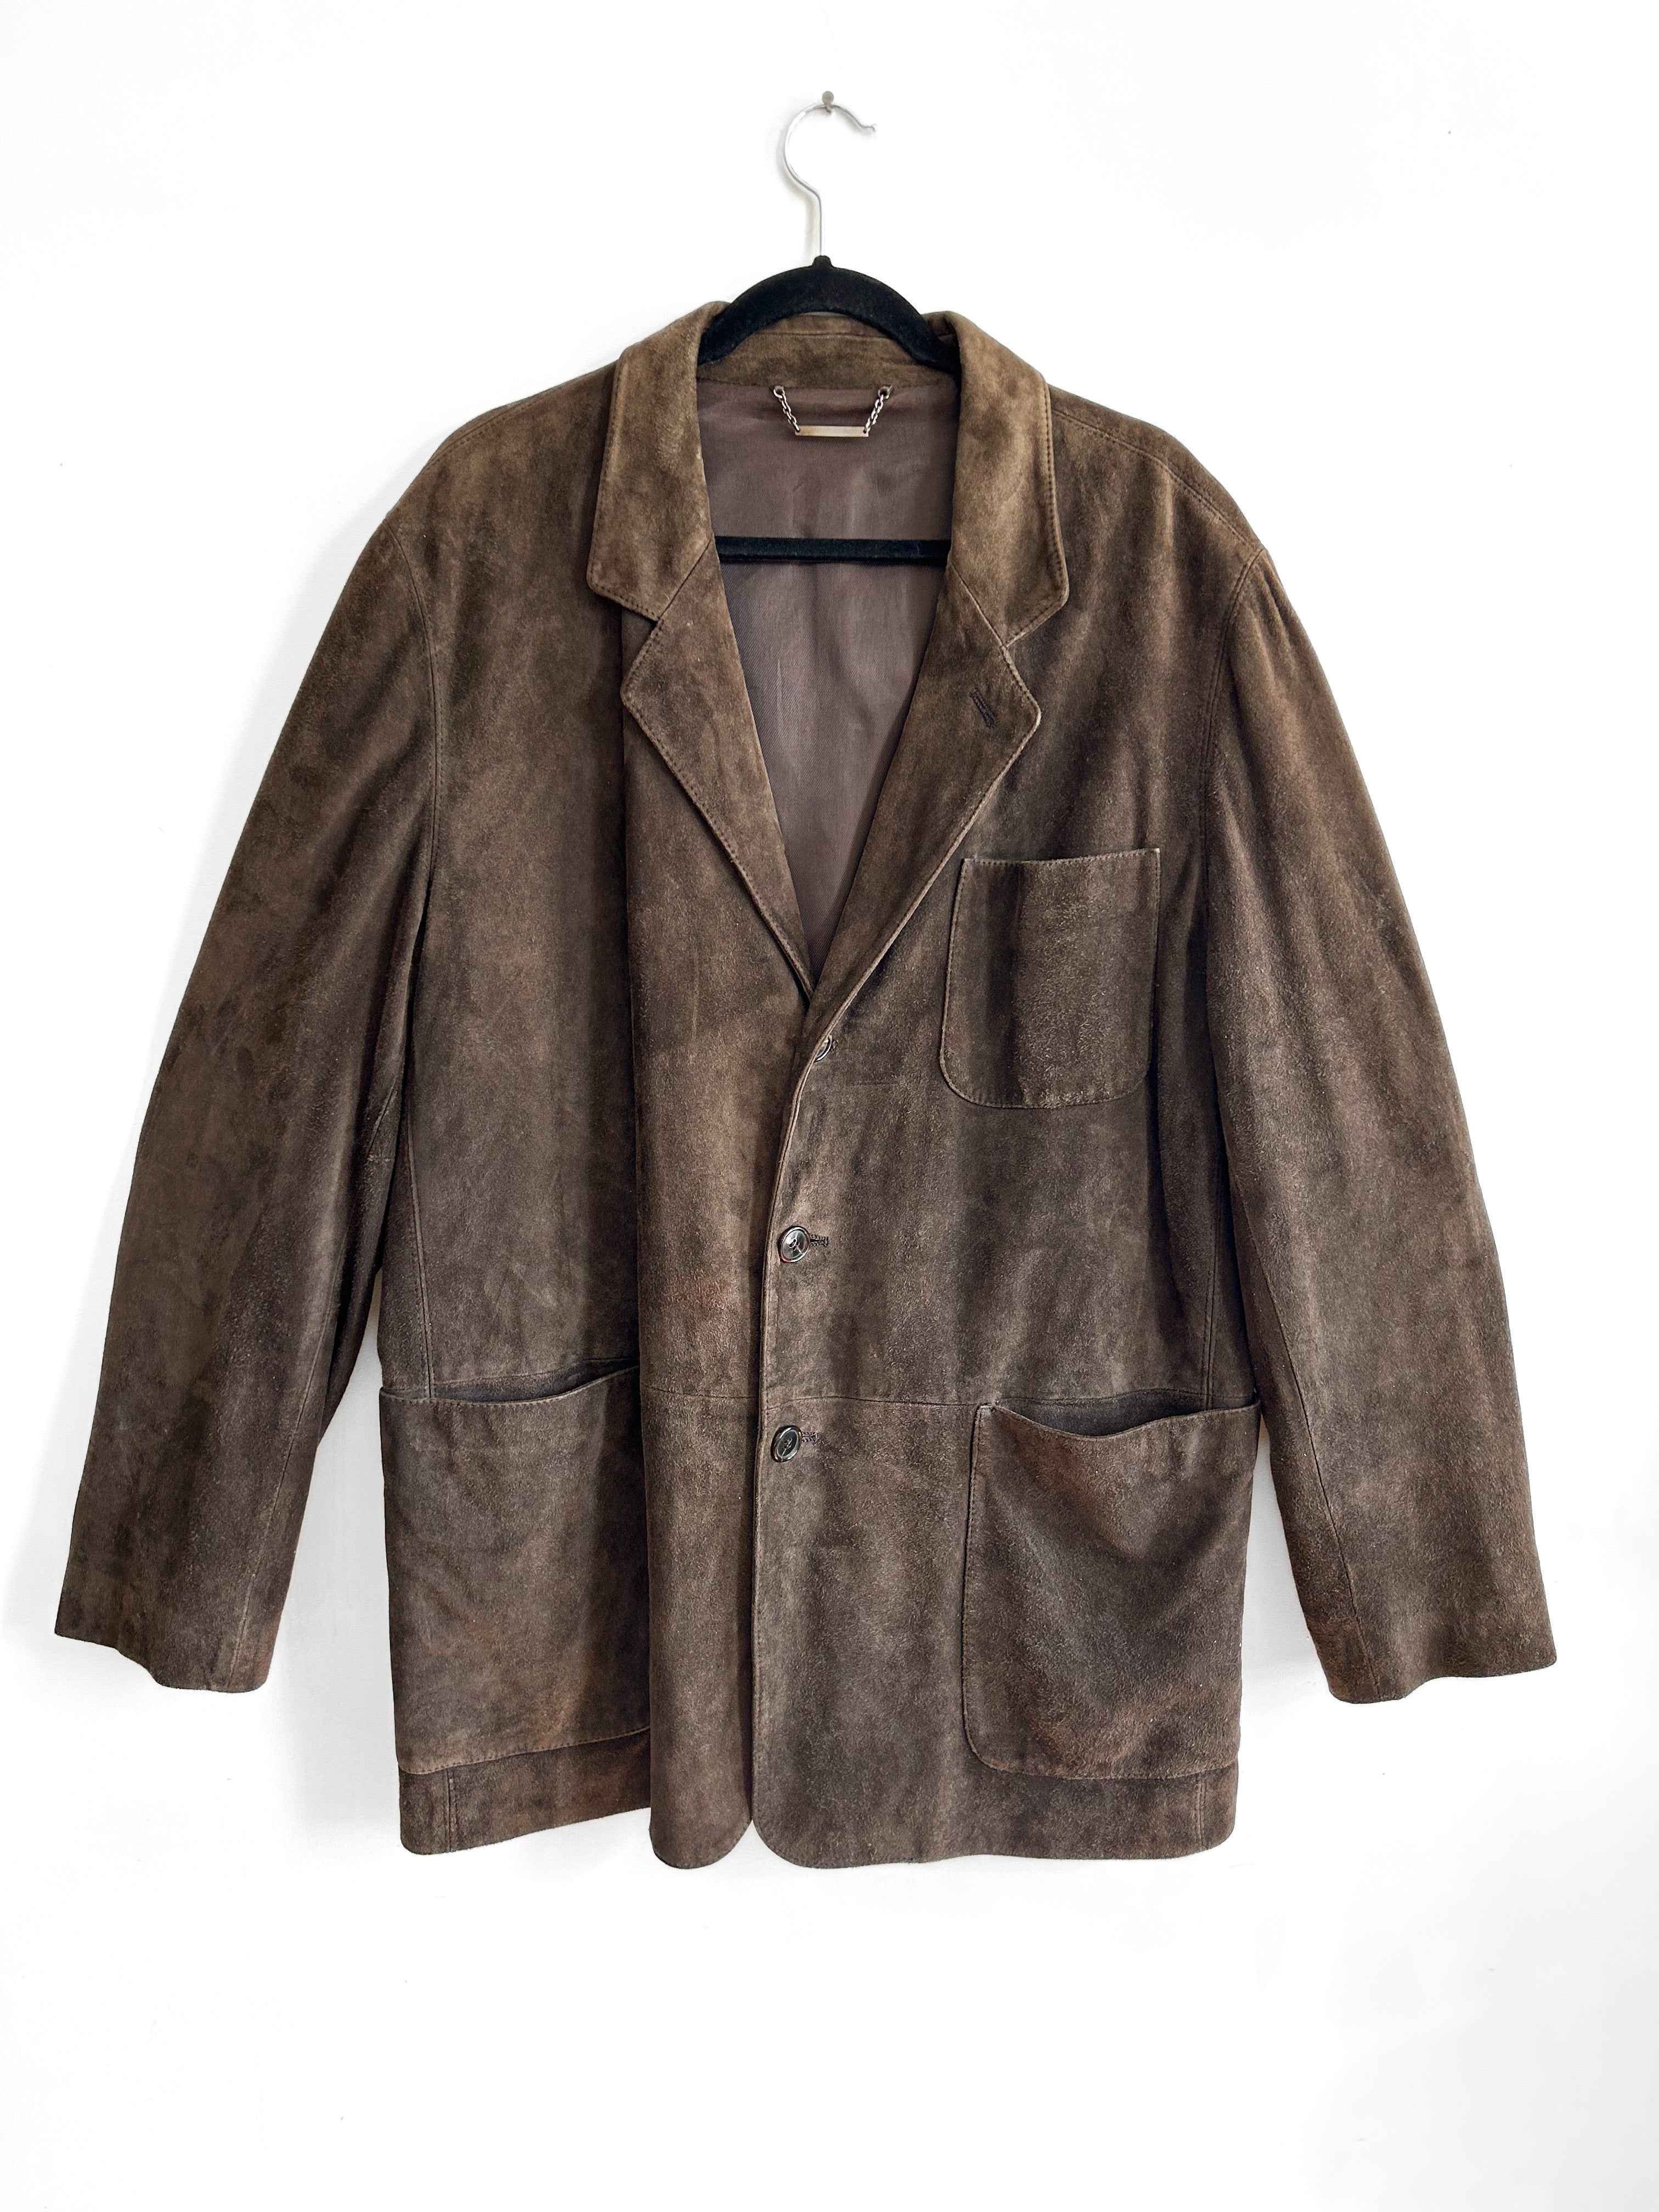 Brown Suede Leather Blazer Jacket, Made in Italy